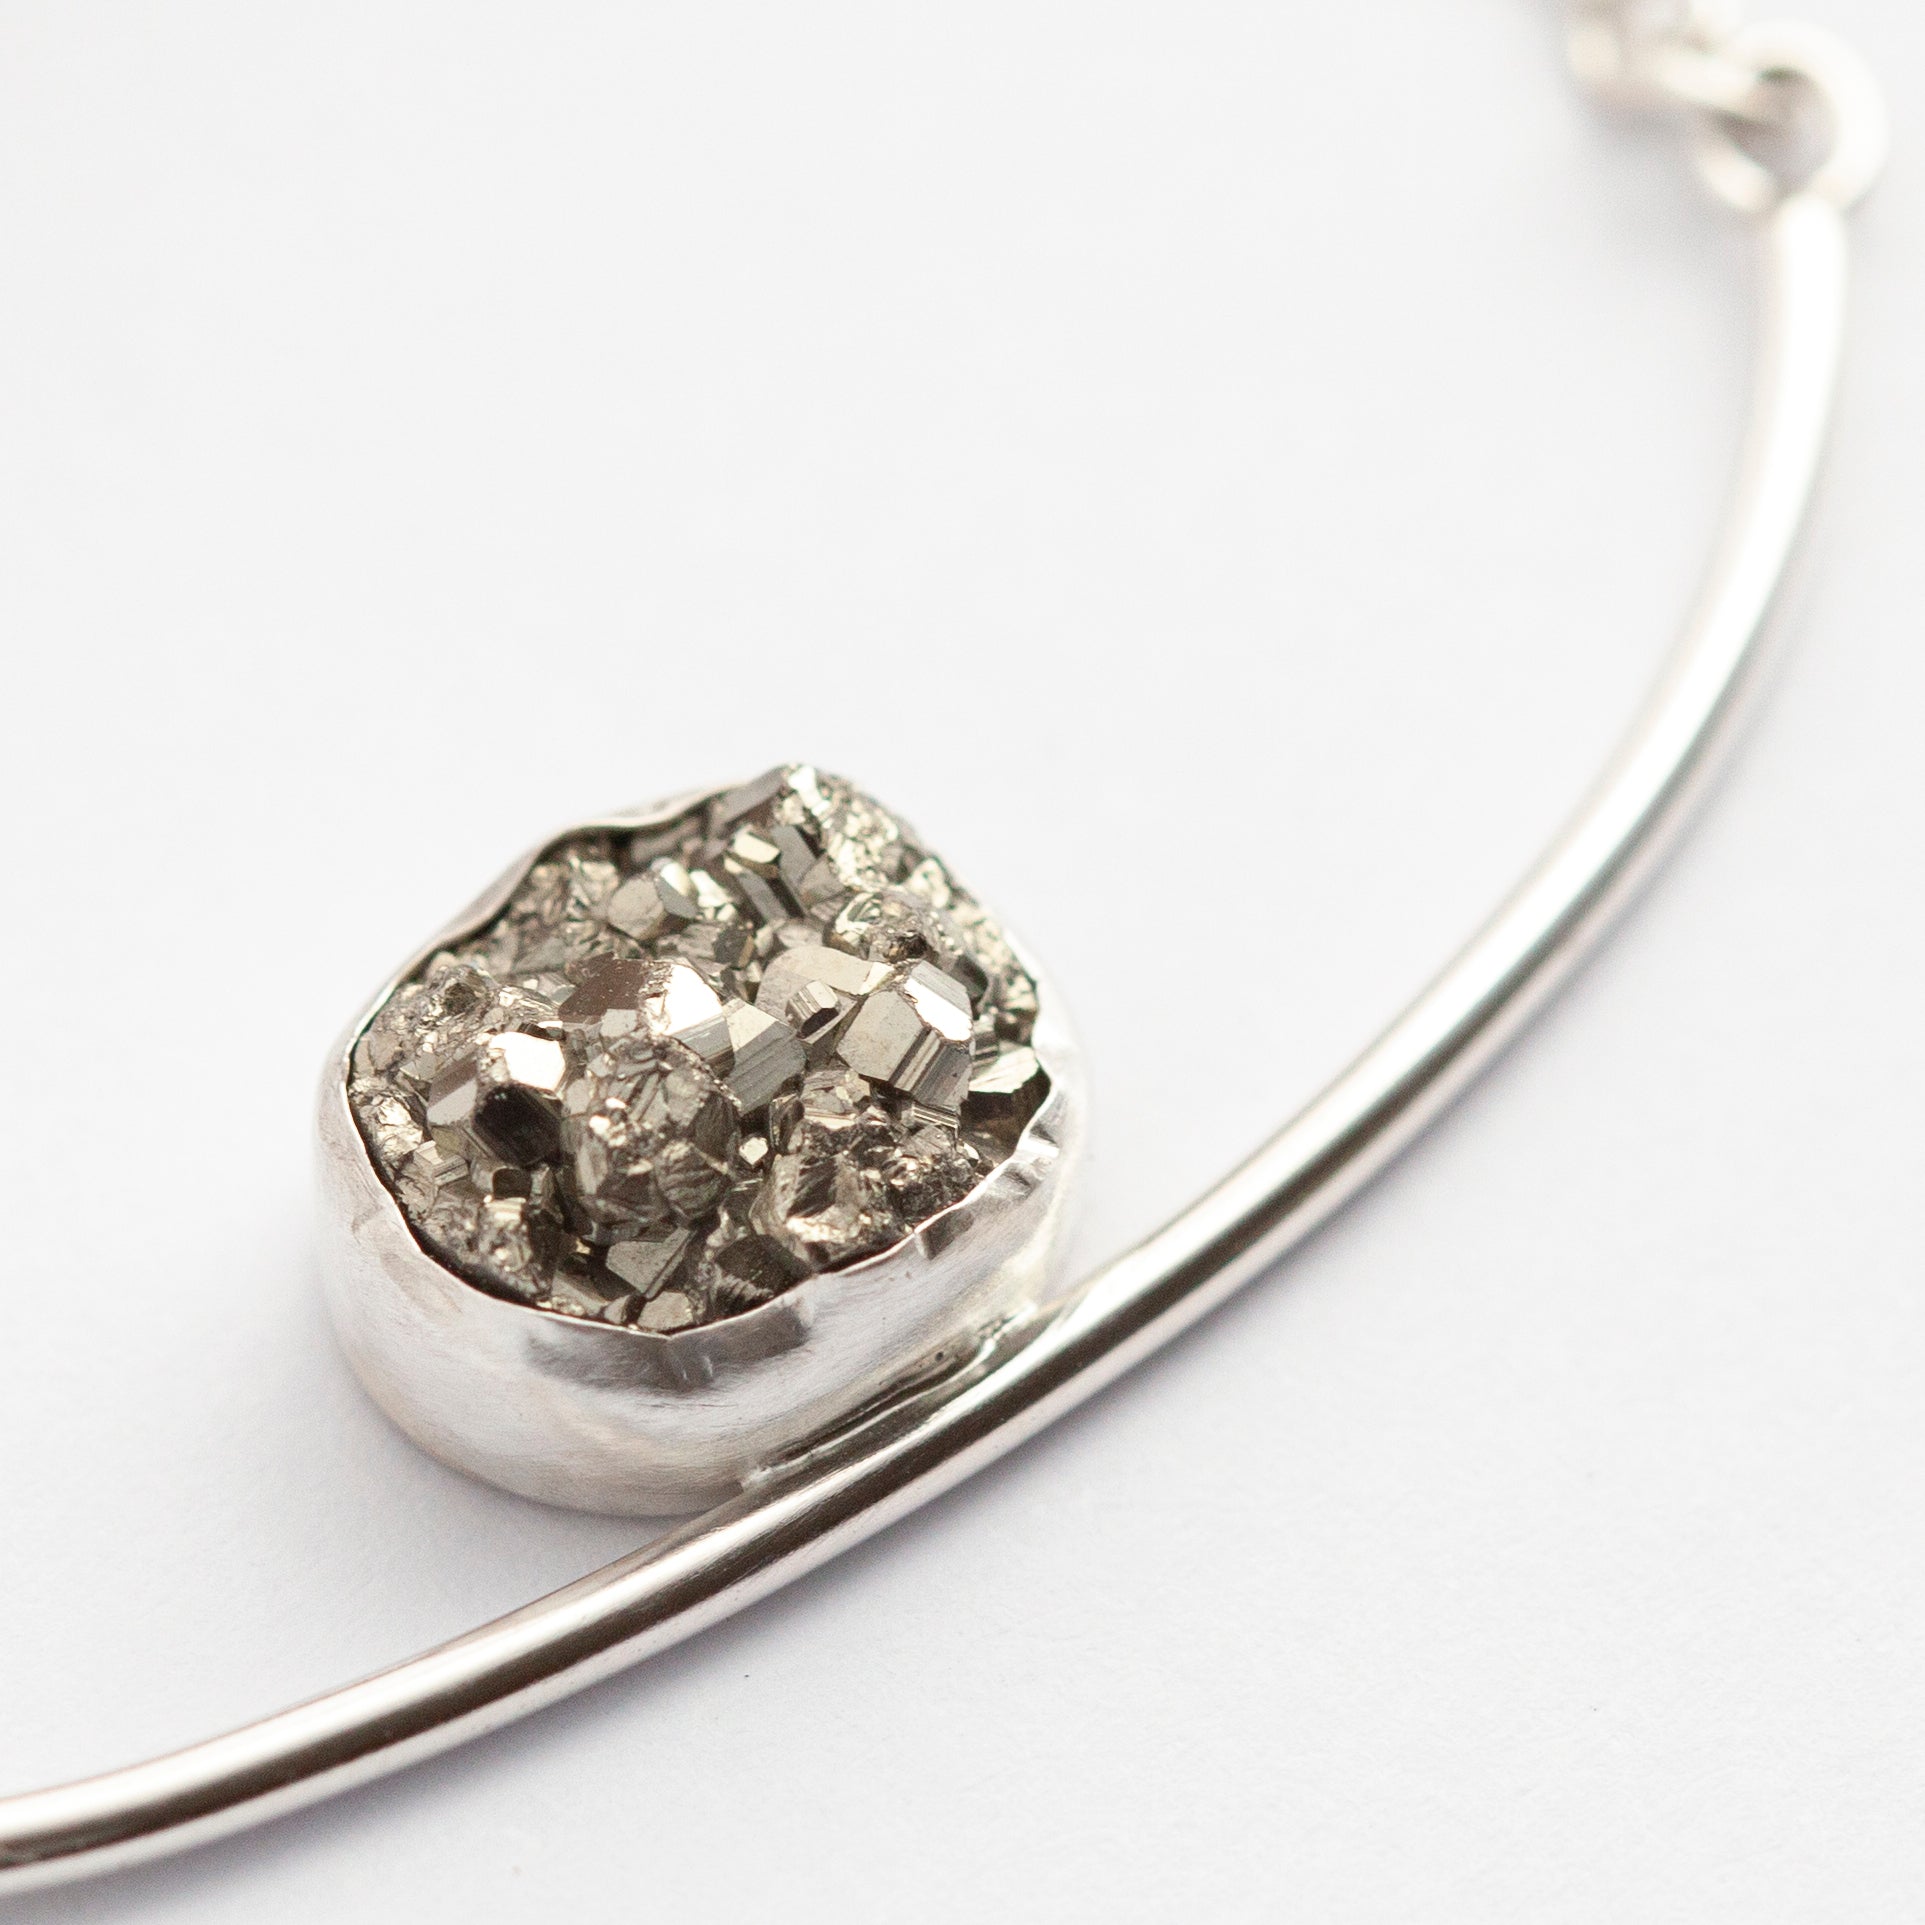 Oona necklace with pyrite   (ready to ship)